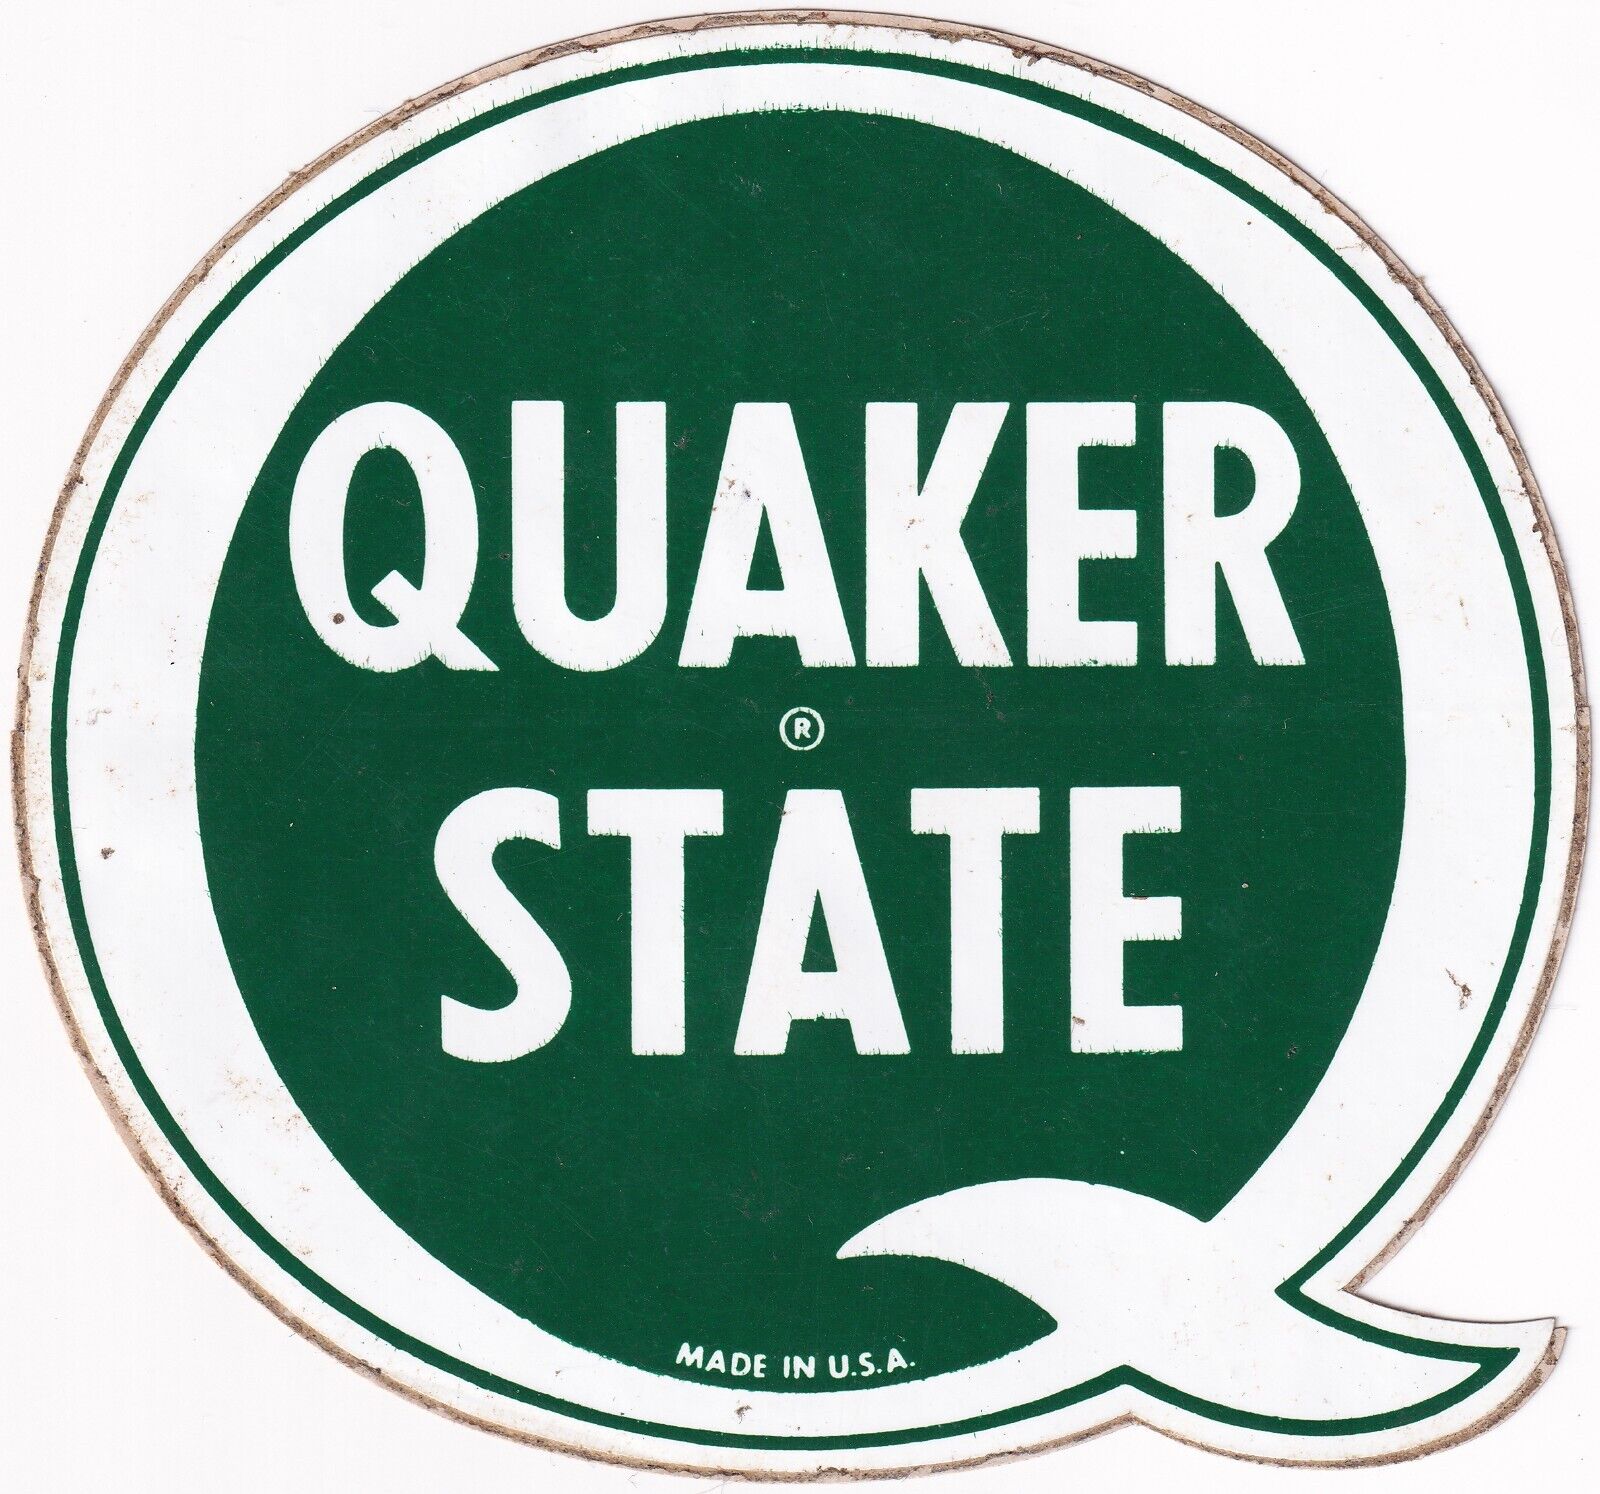 Vintage 1970s New Old Stock Automobile Sticker Decal Quaker State